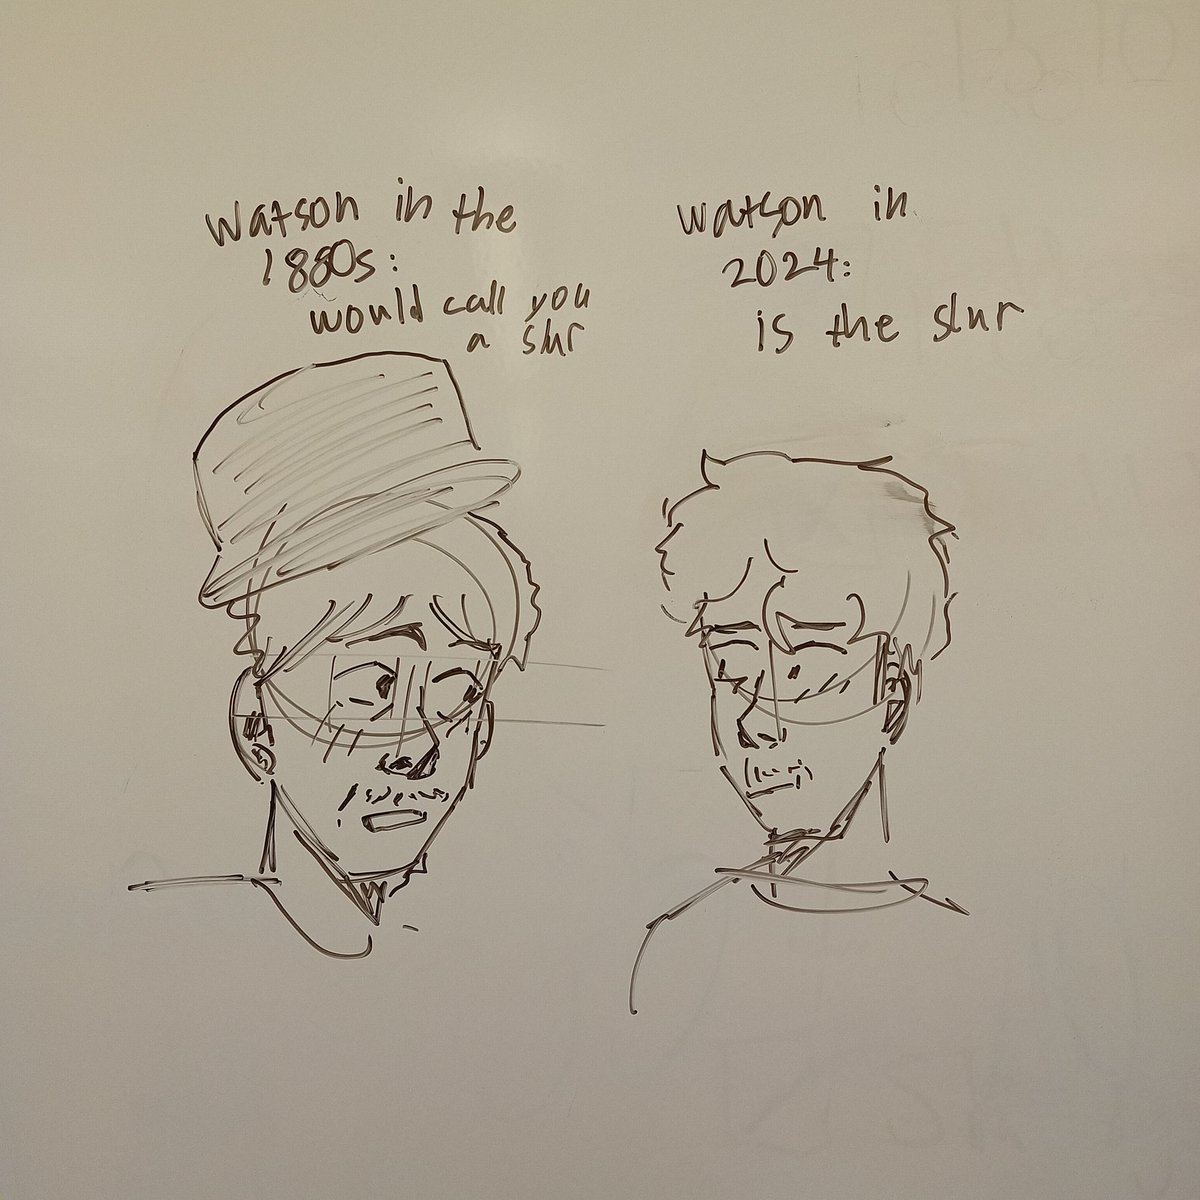 Blip blop. That's my current vocal stim. Anyways. I furiously scribbled this on the whiteboard in a random classroom and then left. #sherlockandco #sherlockholmes